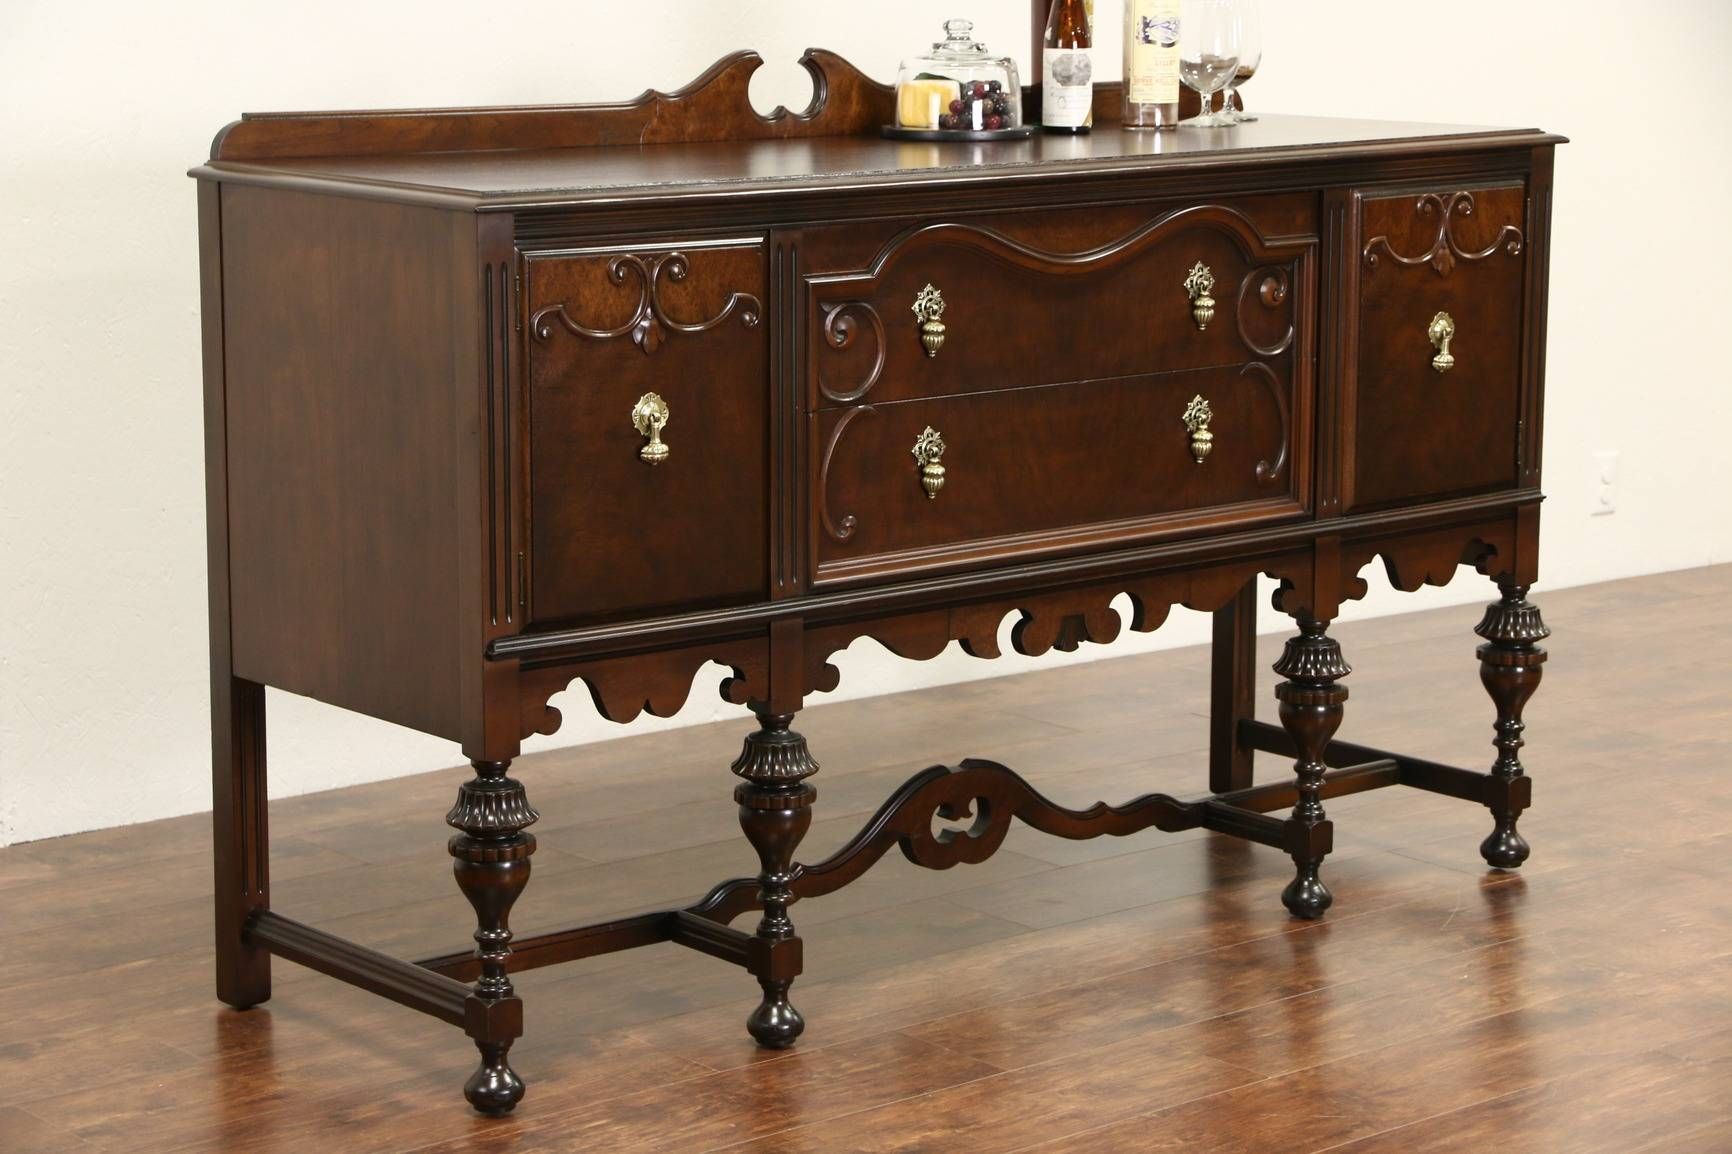 Sold – English Tudor 1920 Antique Walnut Sideboard Server Or With Buffet Sideboard Servers (View 12 of 15)